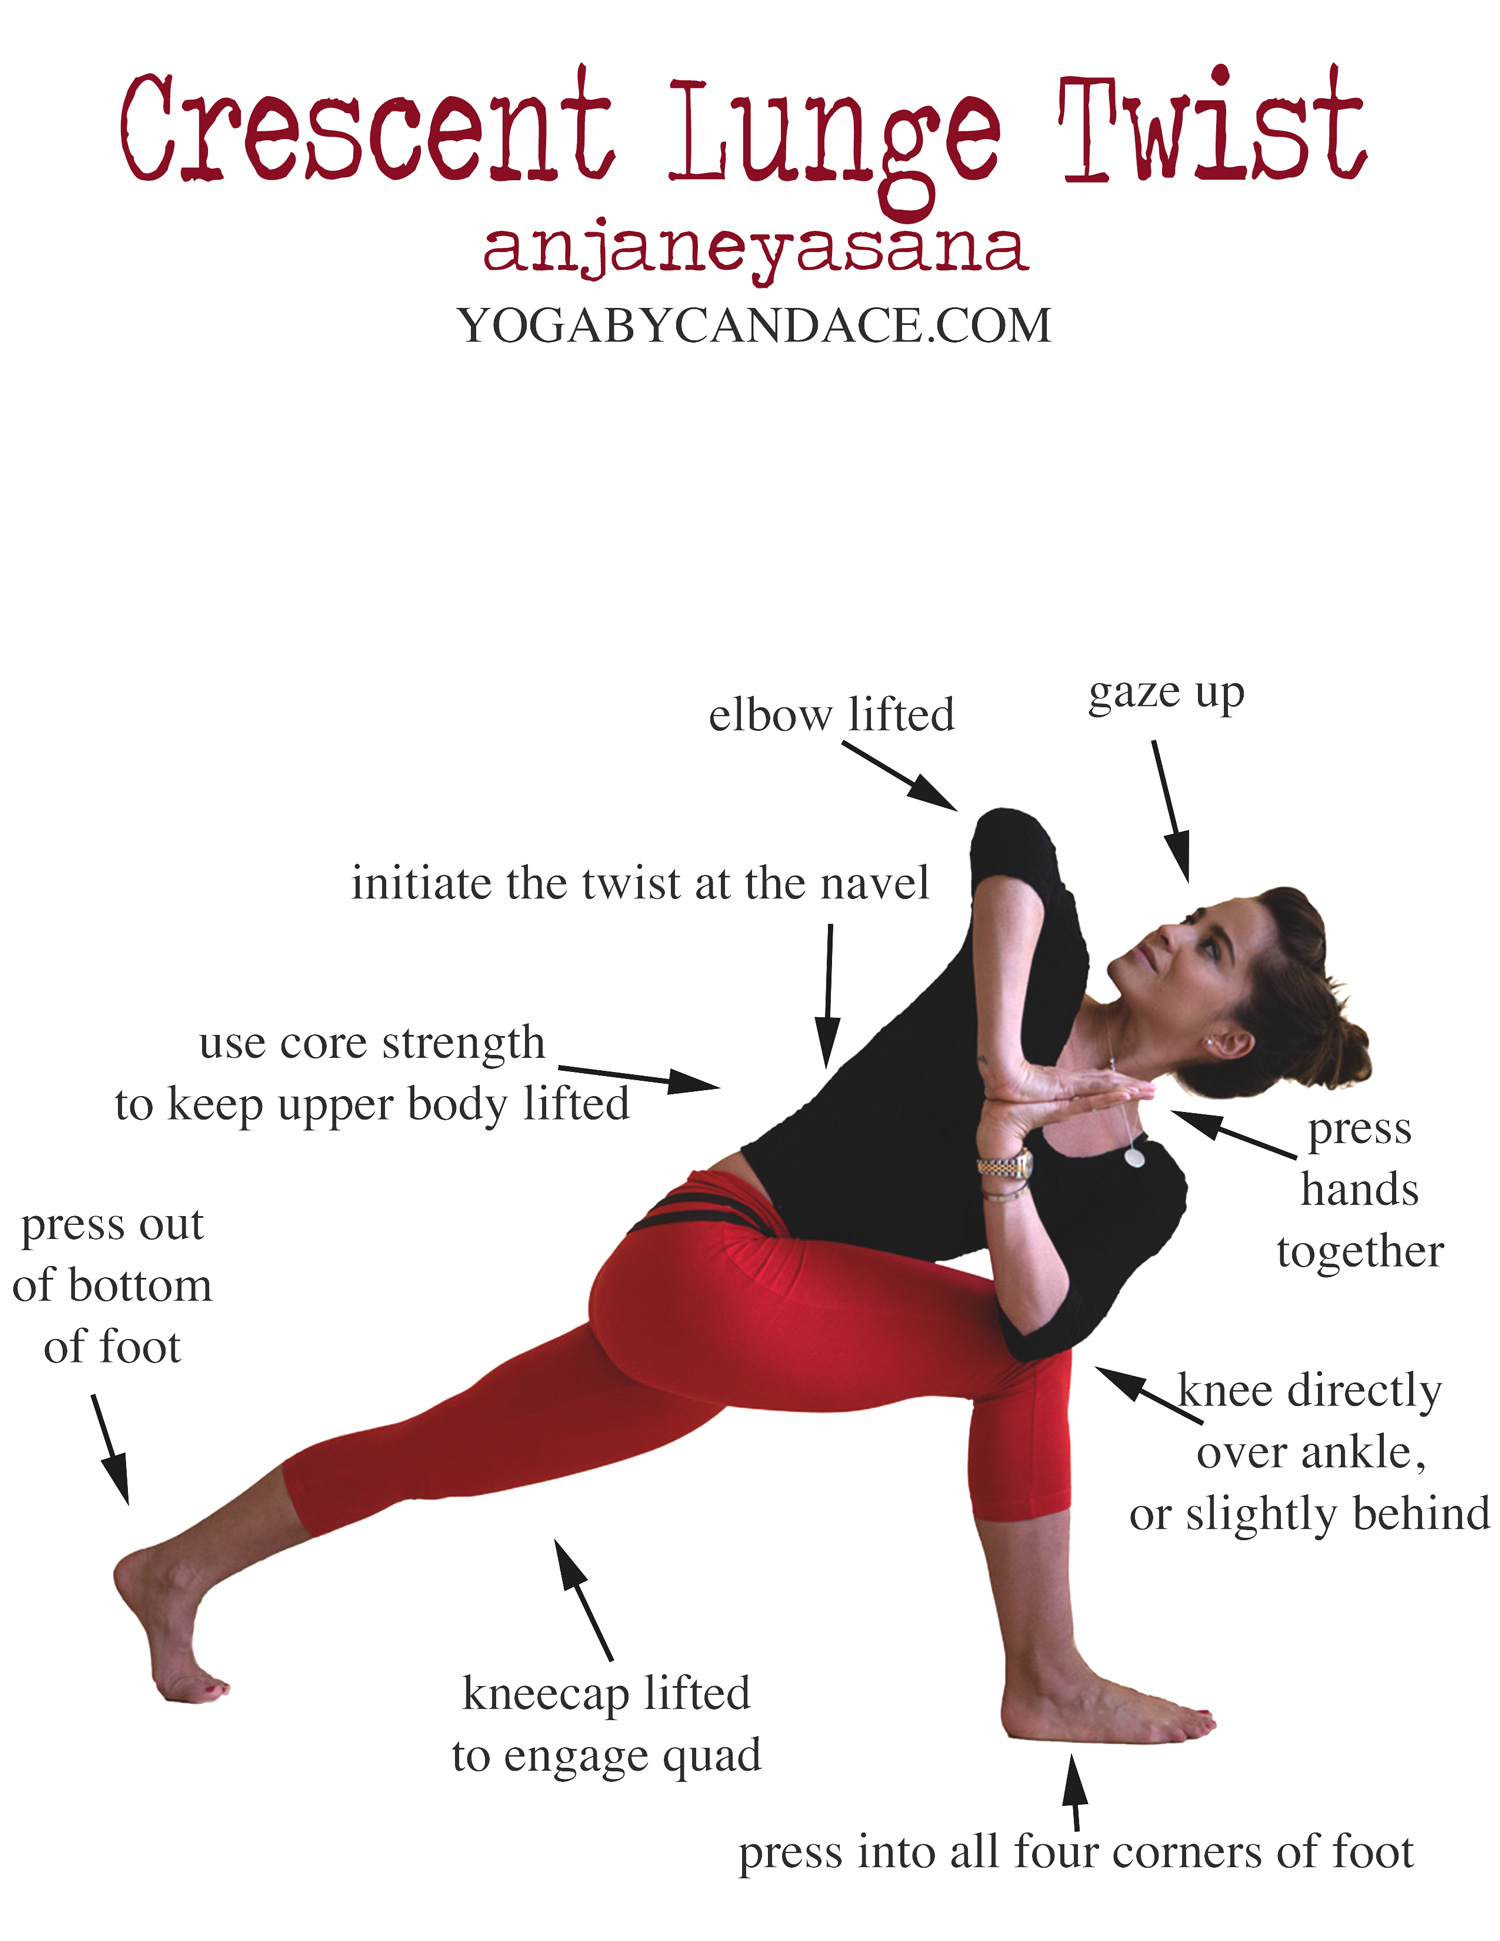 How to do Crescent Lunge Twist — YOGABYCANDACE